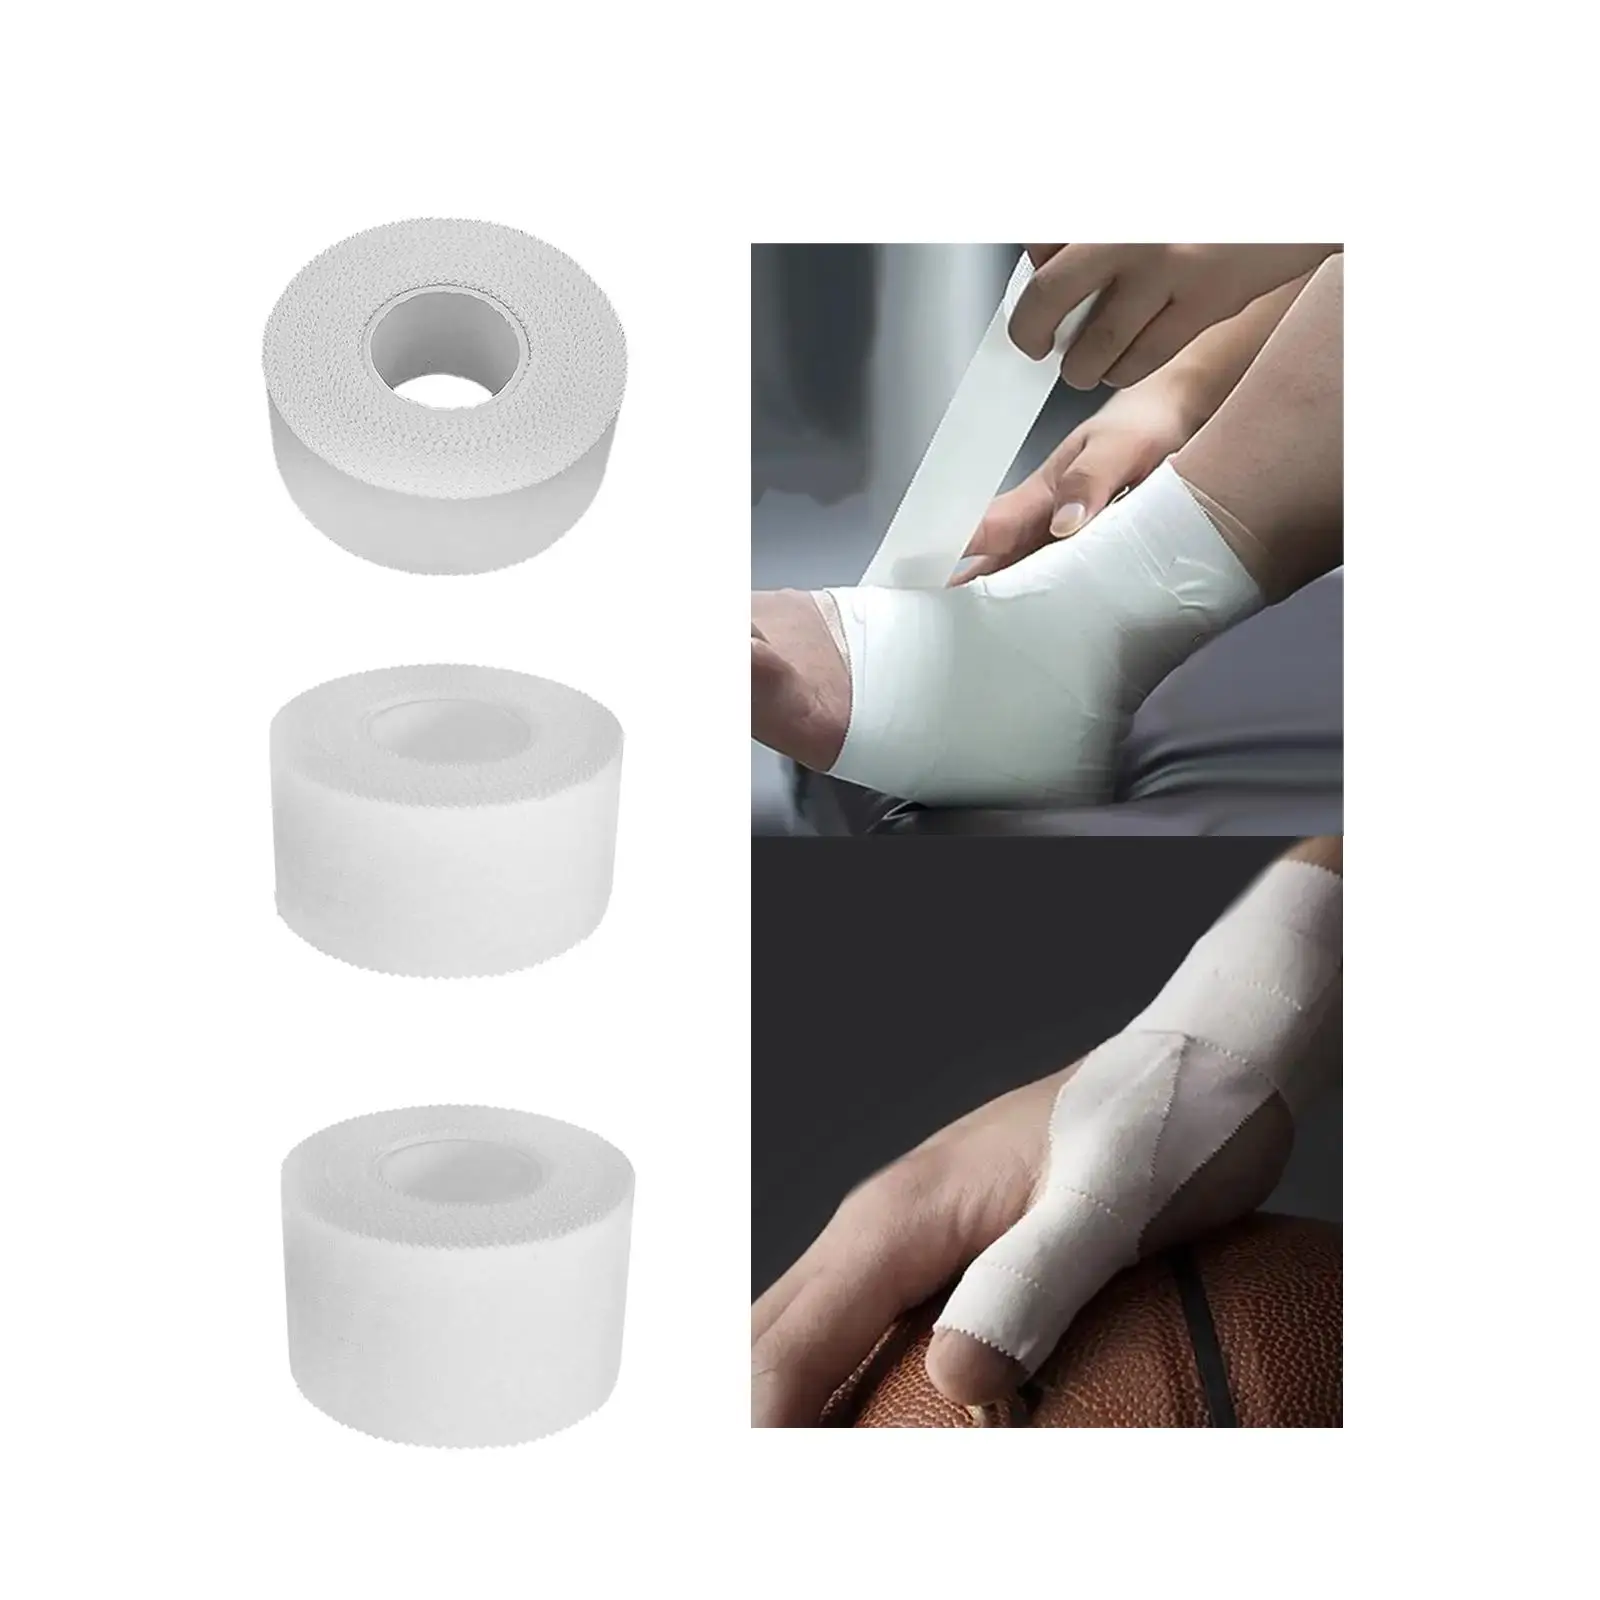 Sports Wrap Tape, 10M Athletic Tape, Breathable Elastic Protective Tape, Wrist